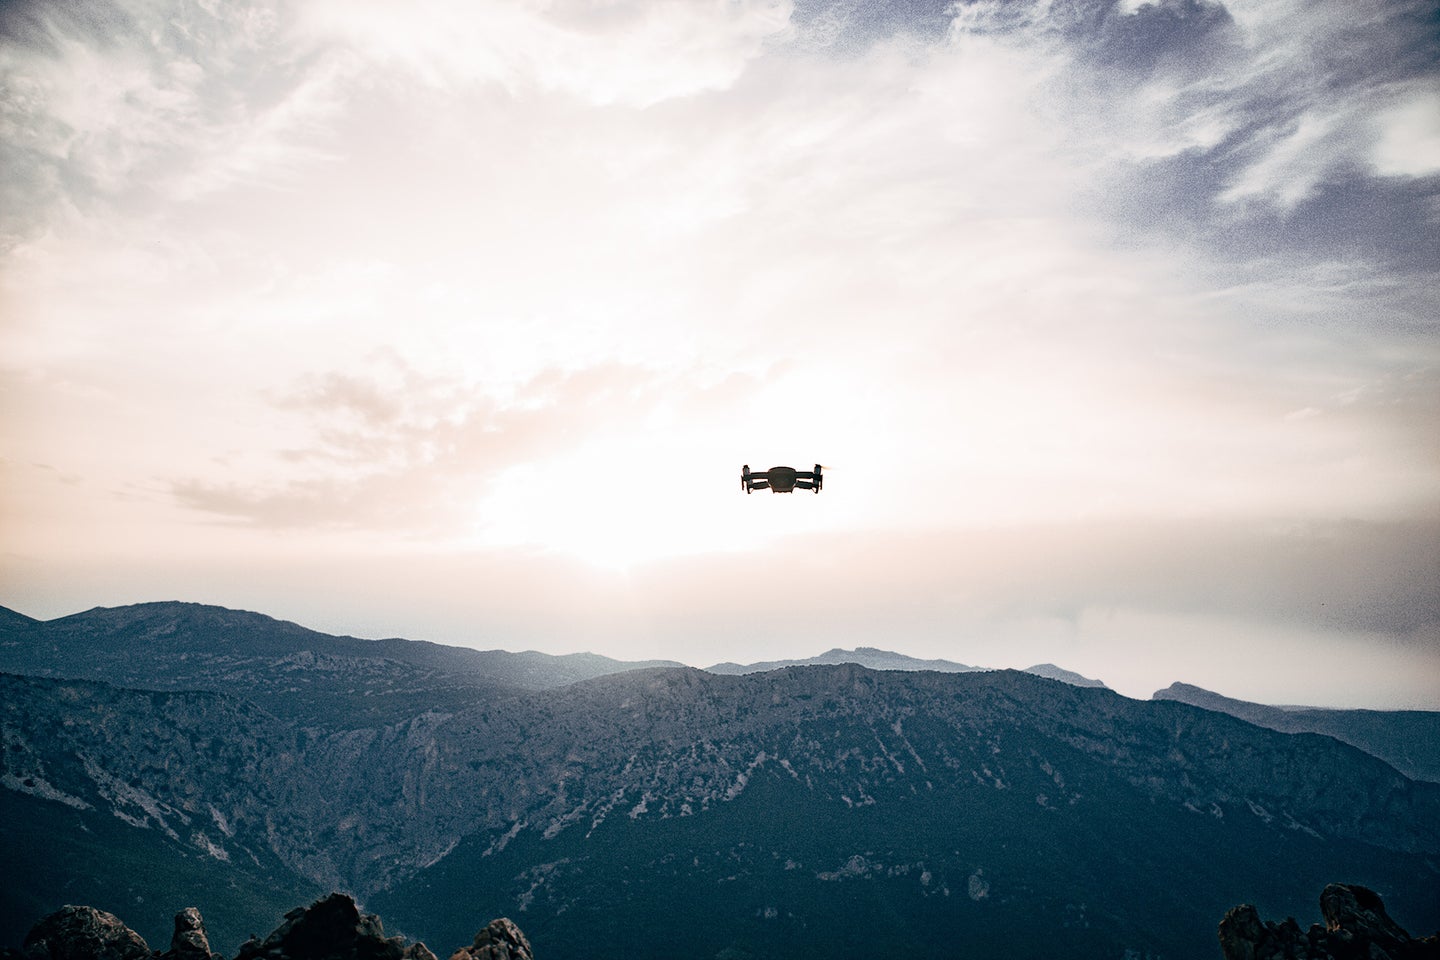 drone flying above the mountains in the sky